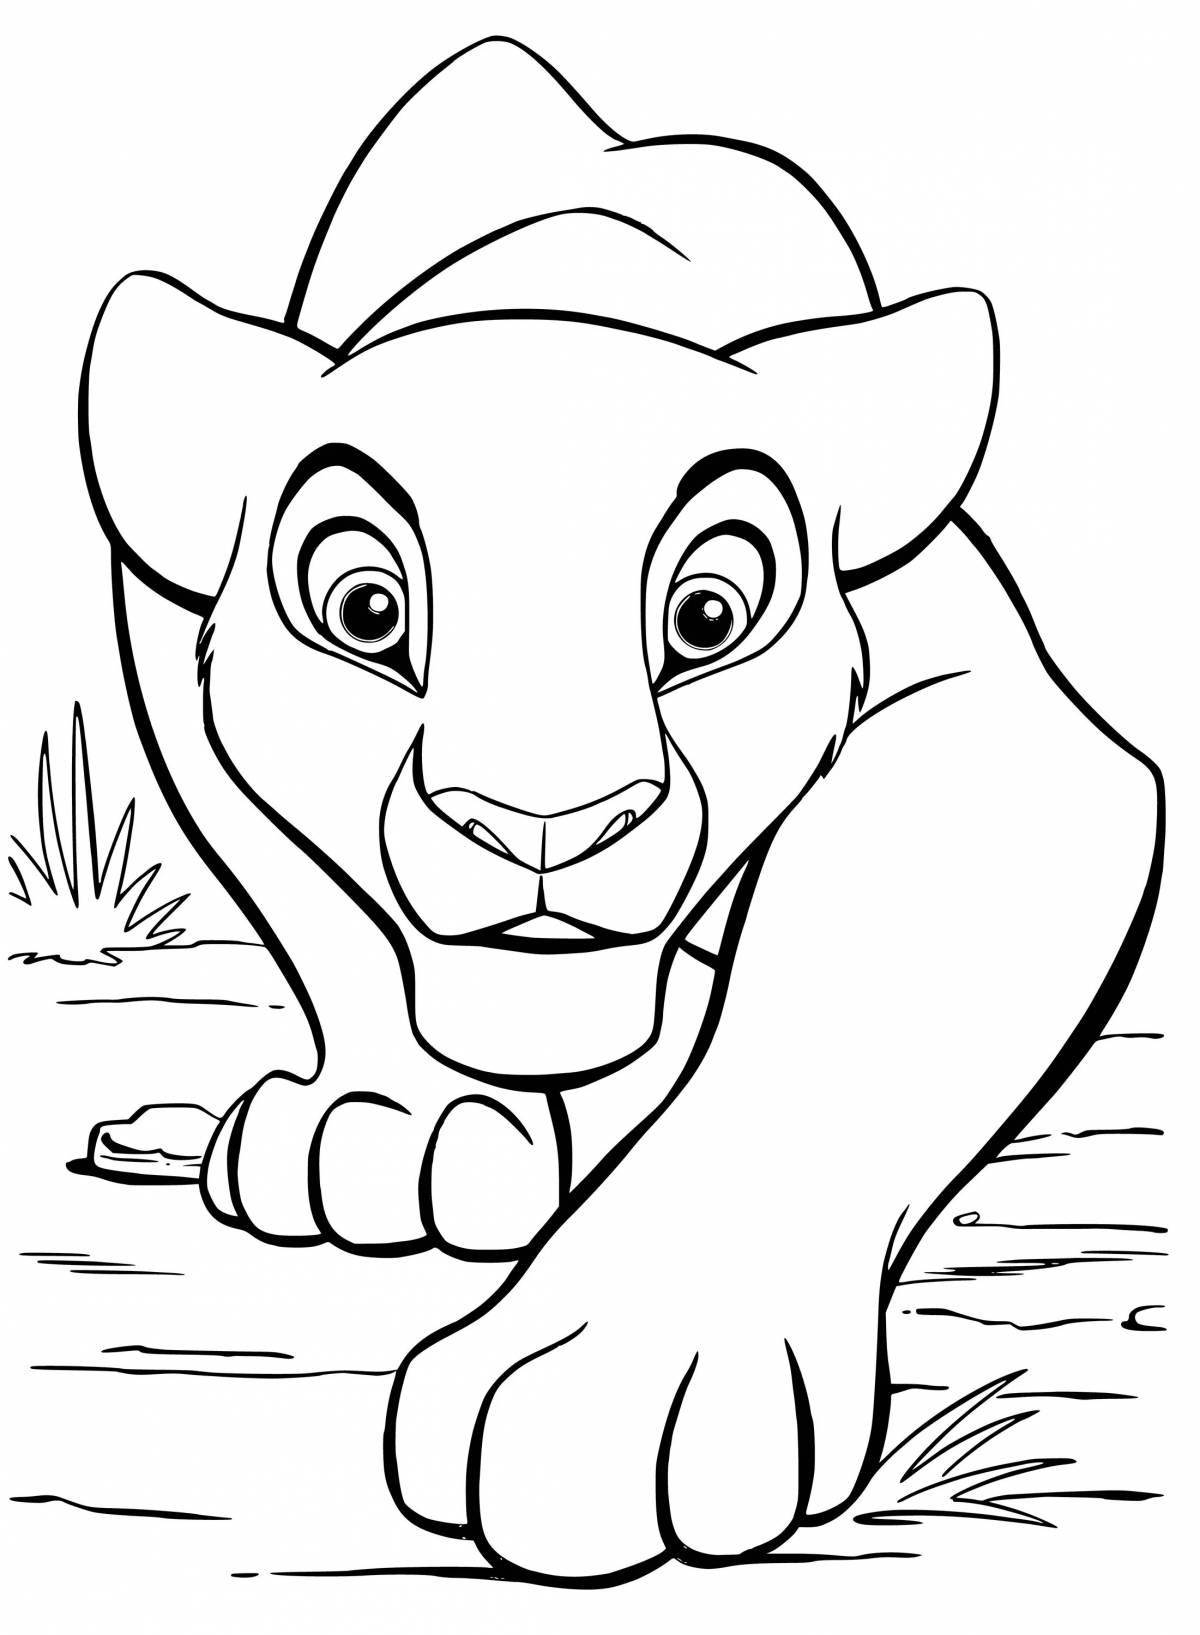 Coloring book color-explosion draw coloring pages